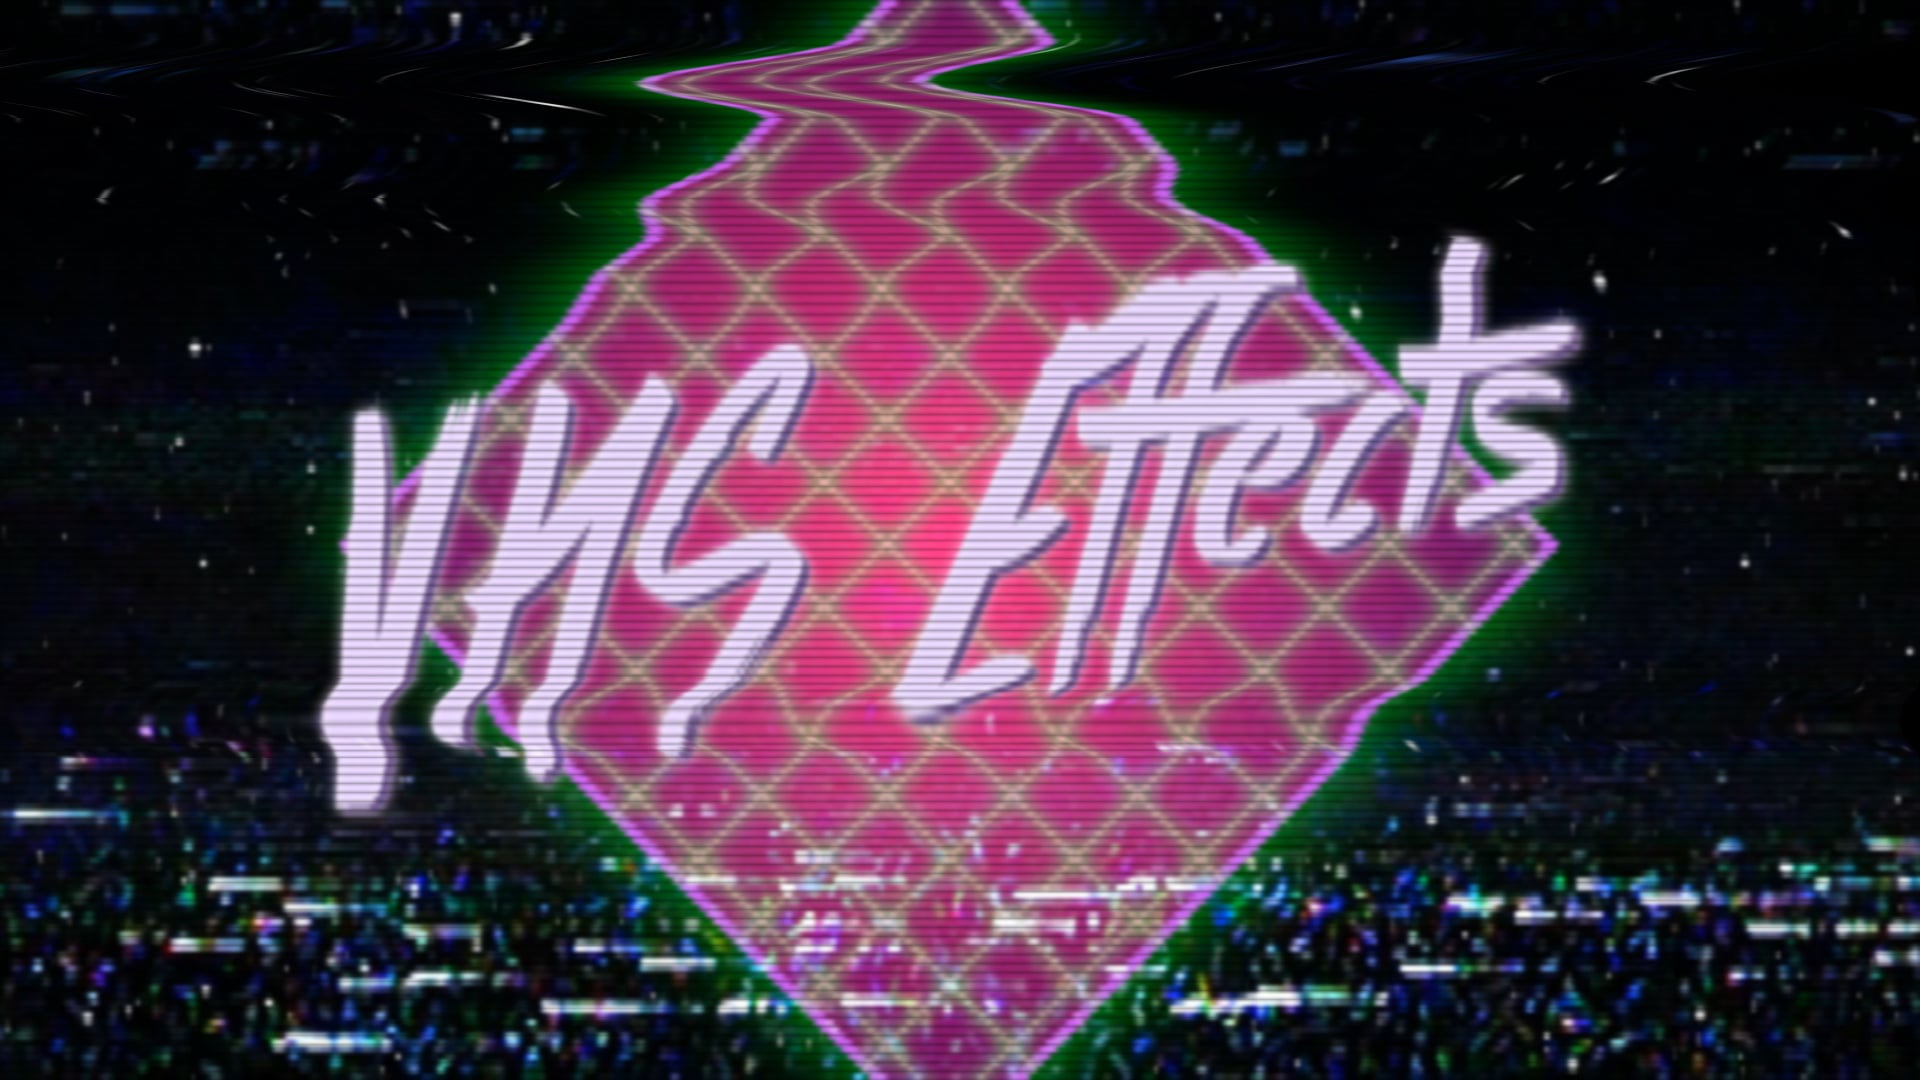 Creation Vhs Effects - After Effect Vhs , HD Wallpaper & Backgrounds